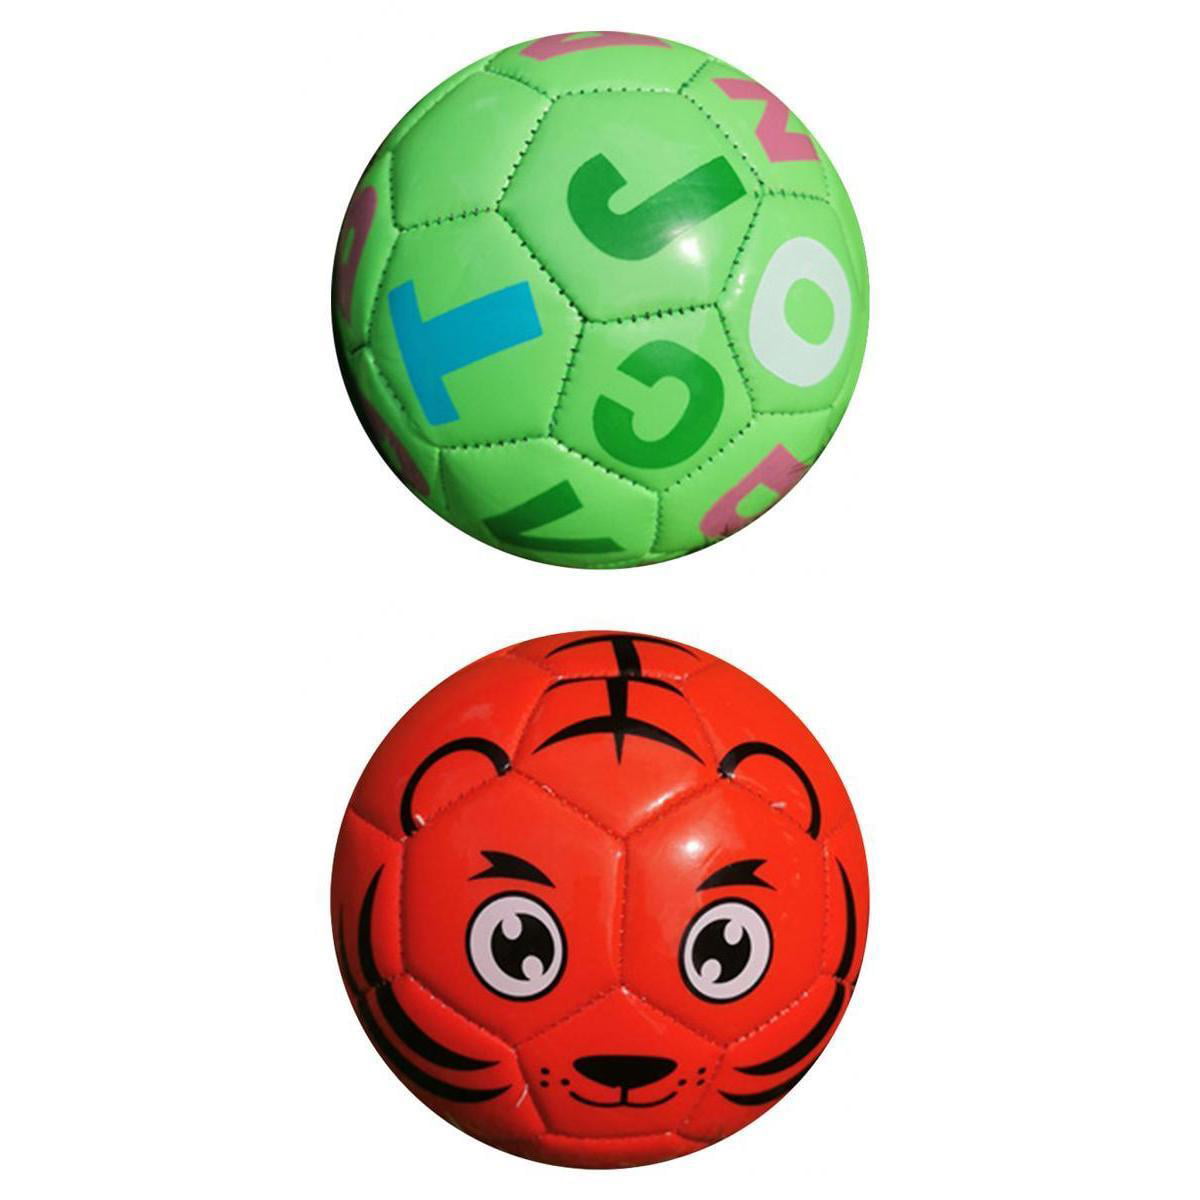 Soccer Size 2 Sports Game Training Soft Foam Ball Recreation Play Ball Gifts 